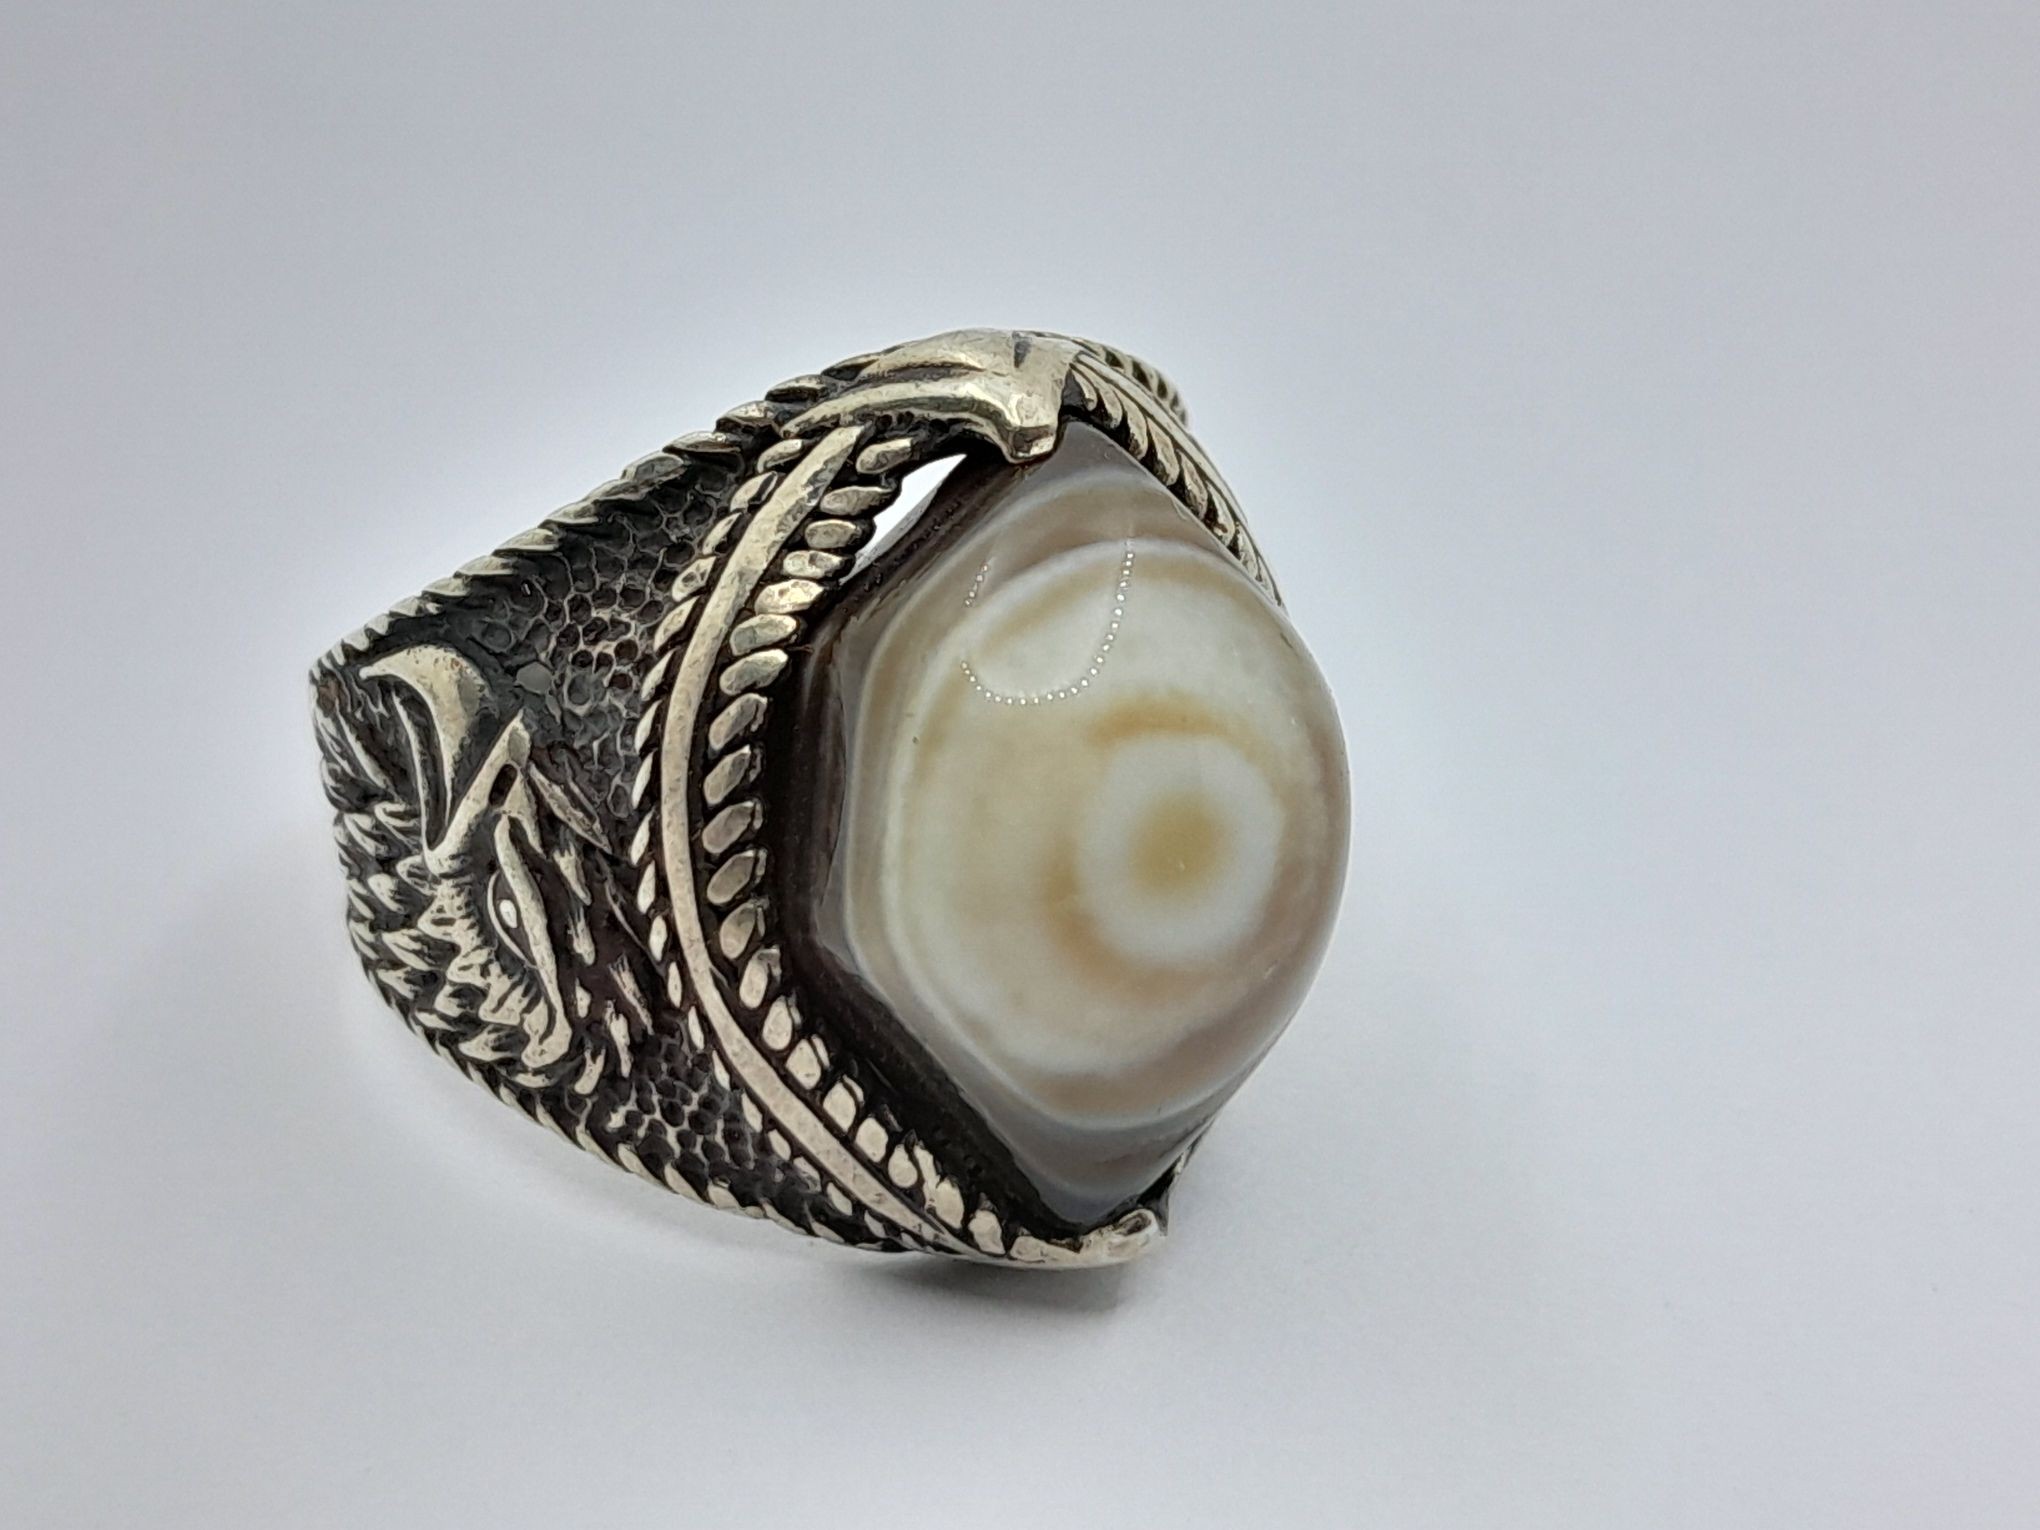 A ring with a Sulaimani agate stone